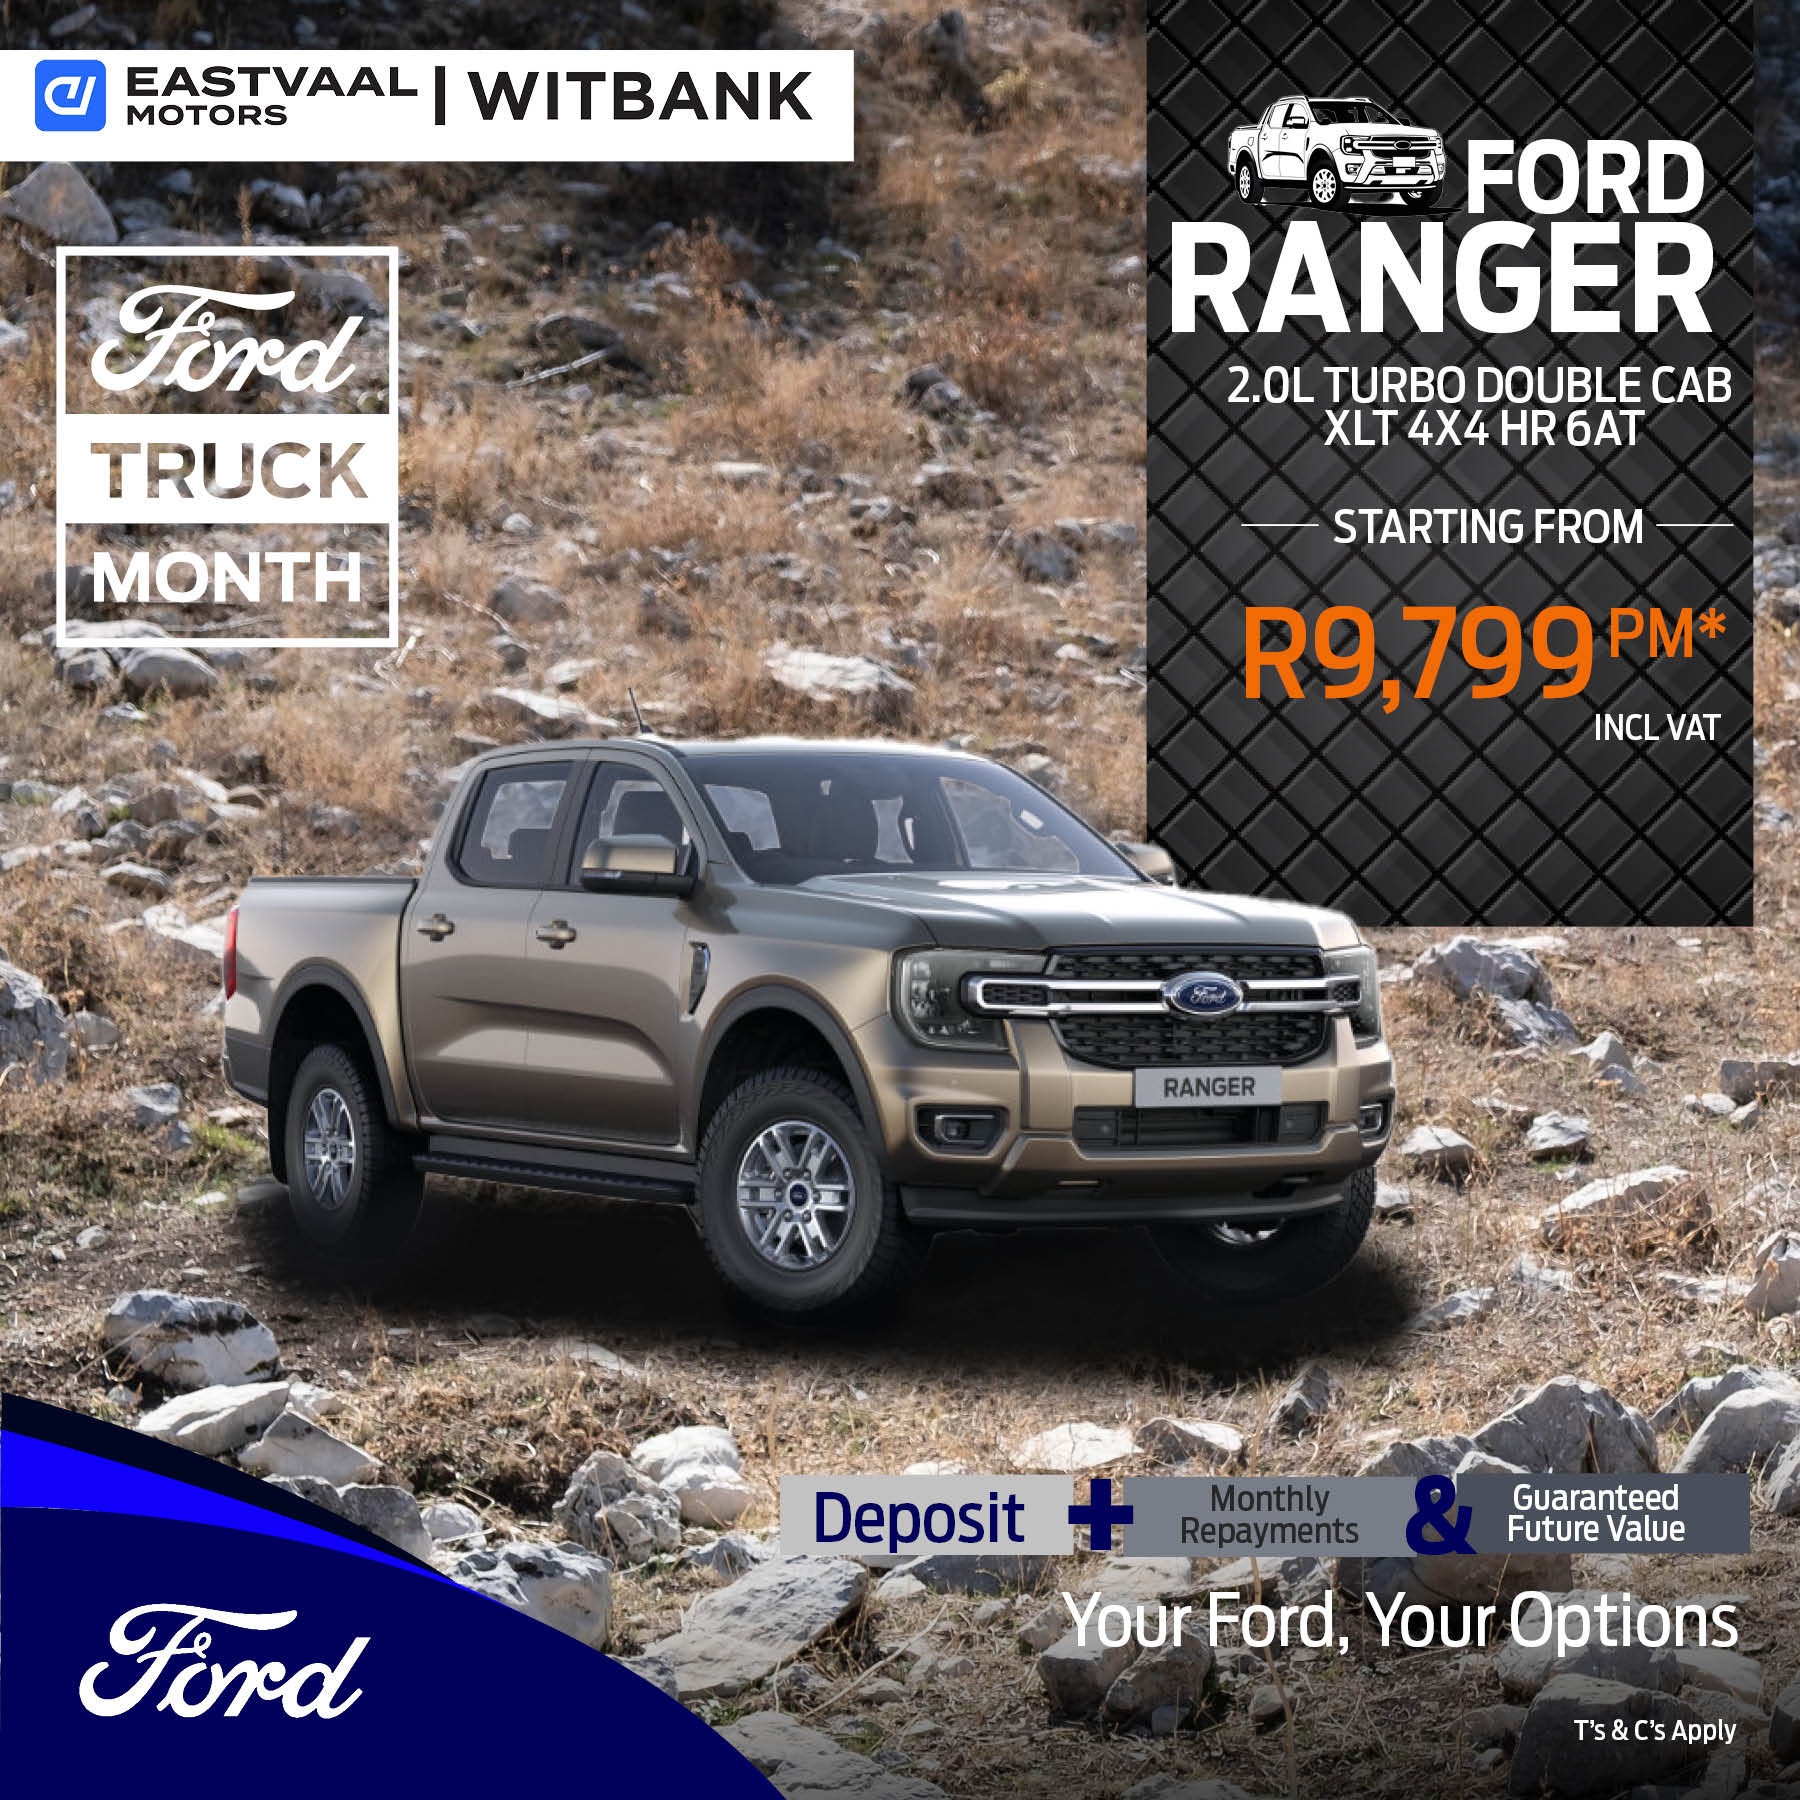 Ford Ranger 2.0L Turbo Double cab XLT 4×4 HR 6AT image from 